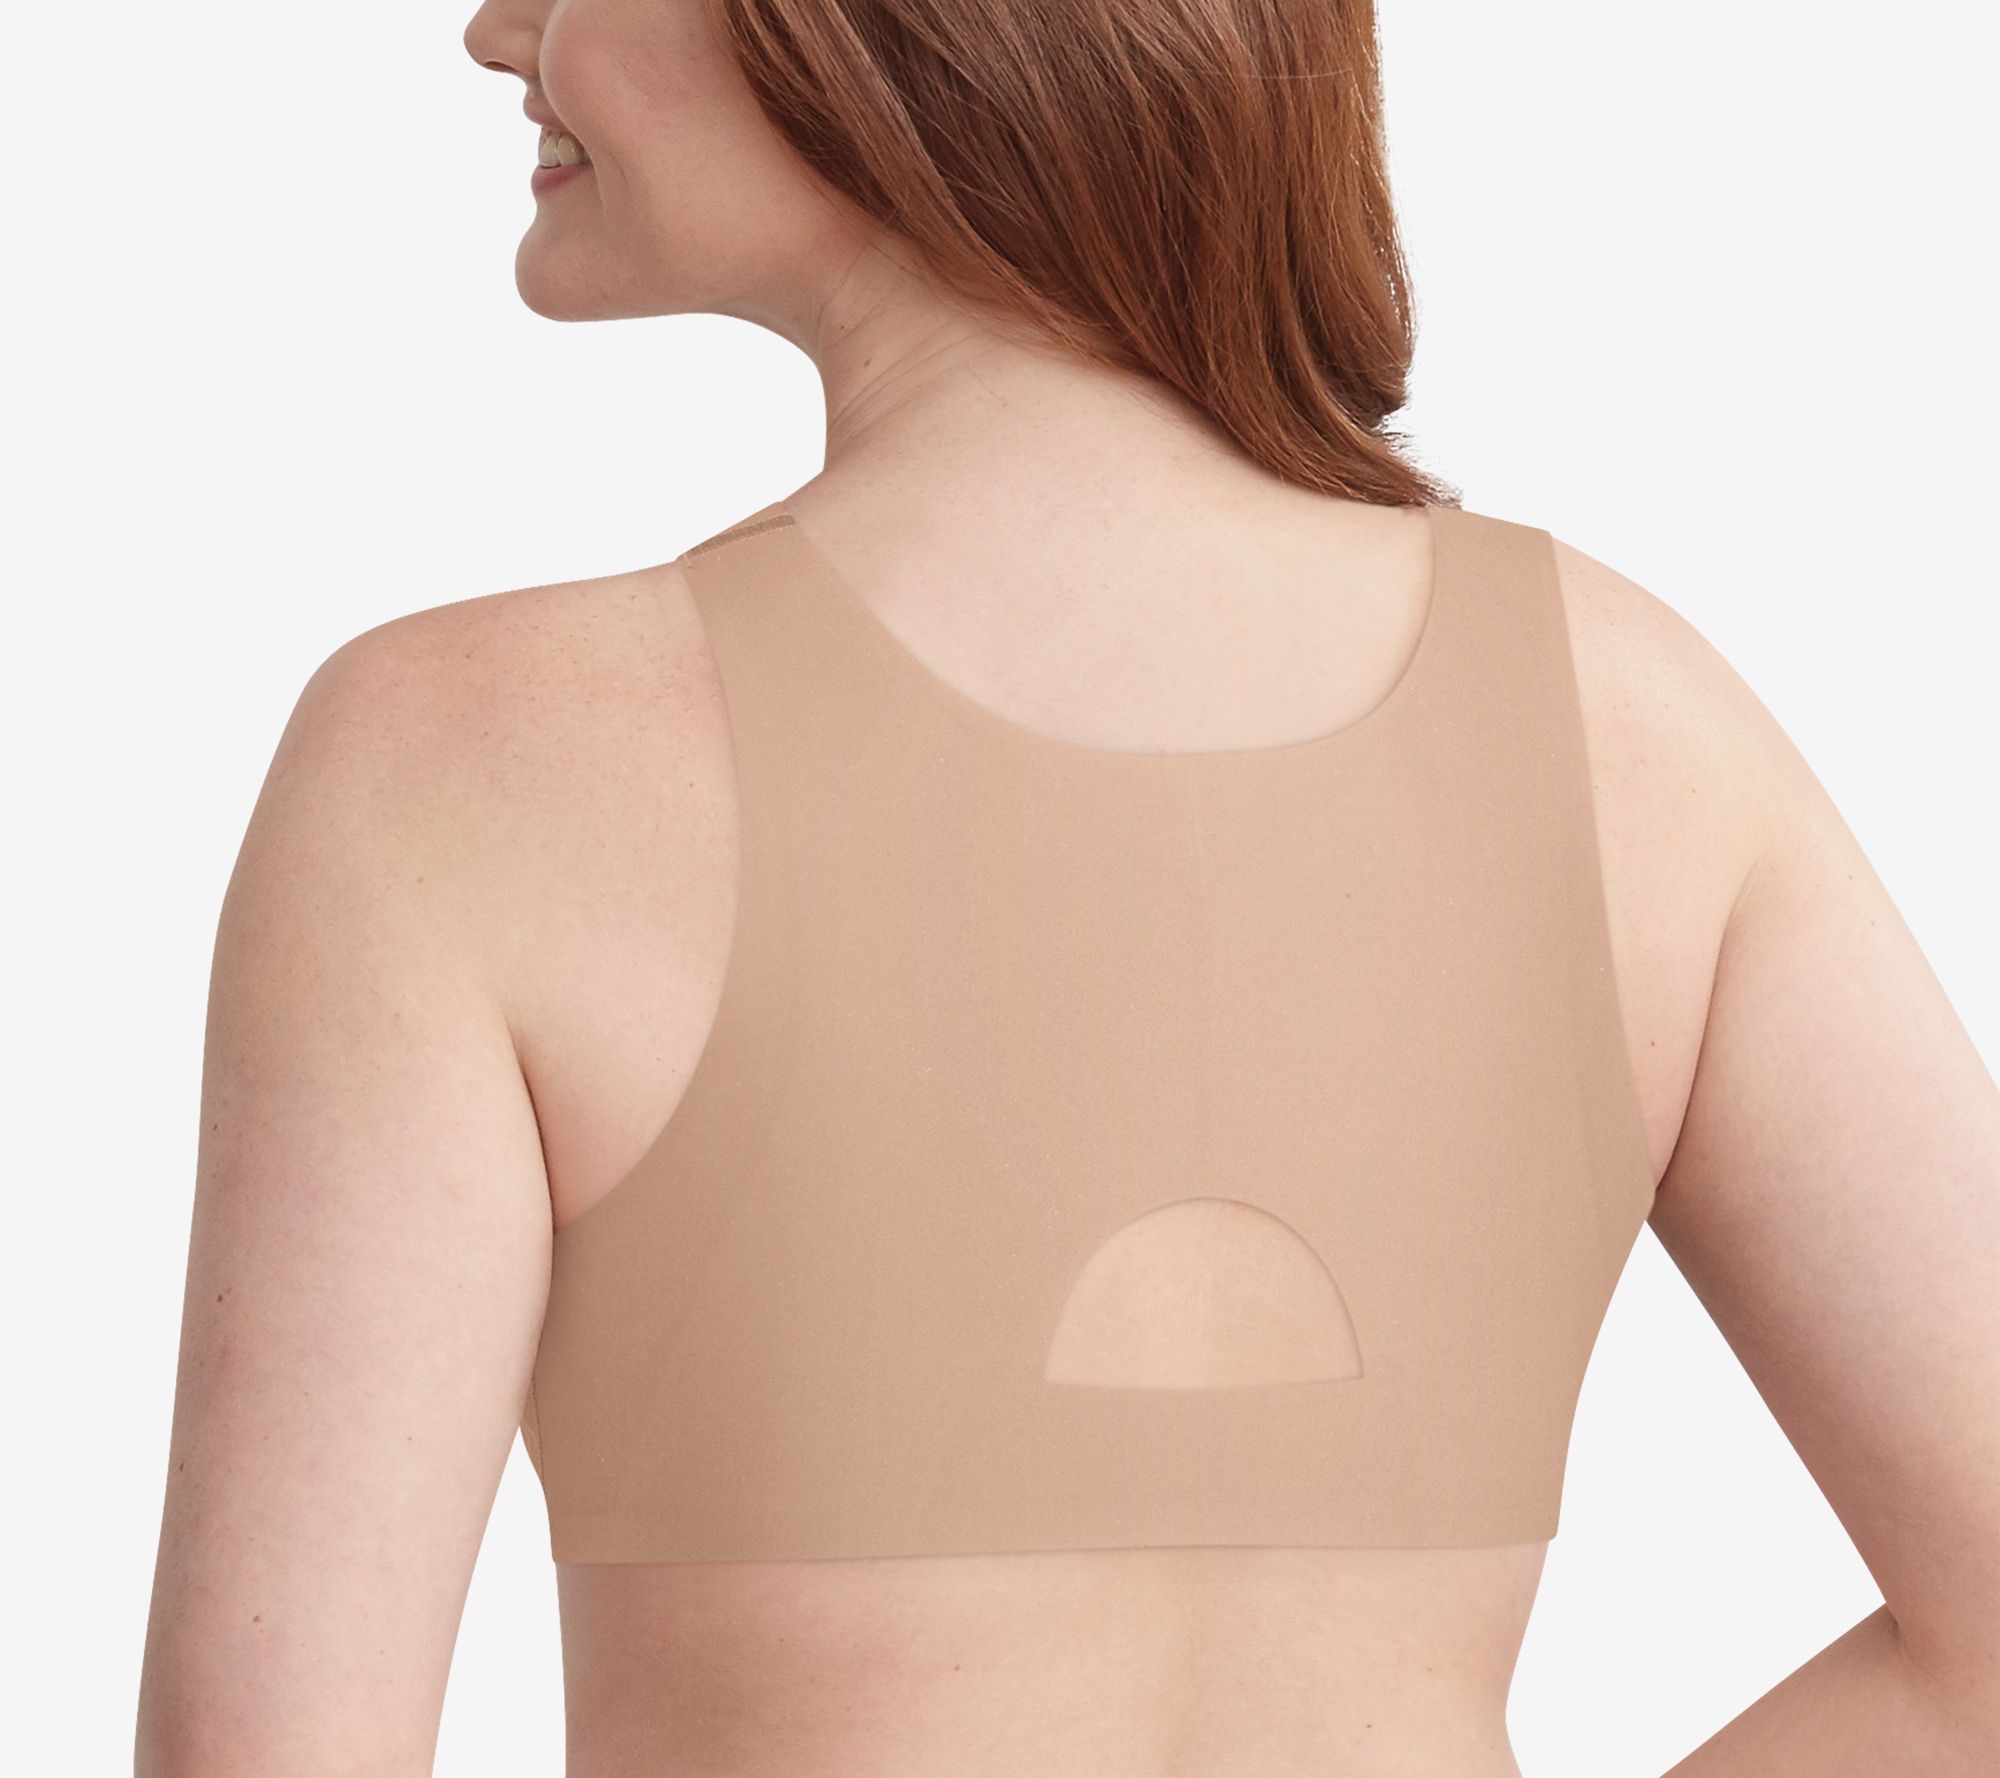 Best Posture Corrector and Posture Support Bras — Our Top Picks  Posture  support bra, Posture corrector for women, Posture support